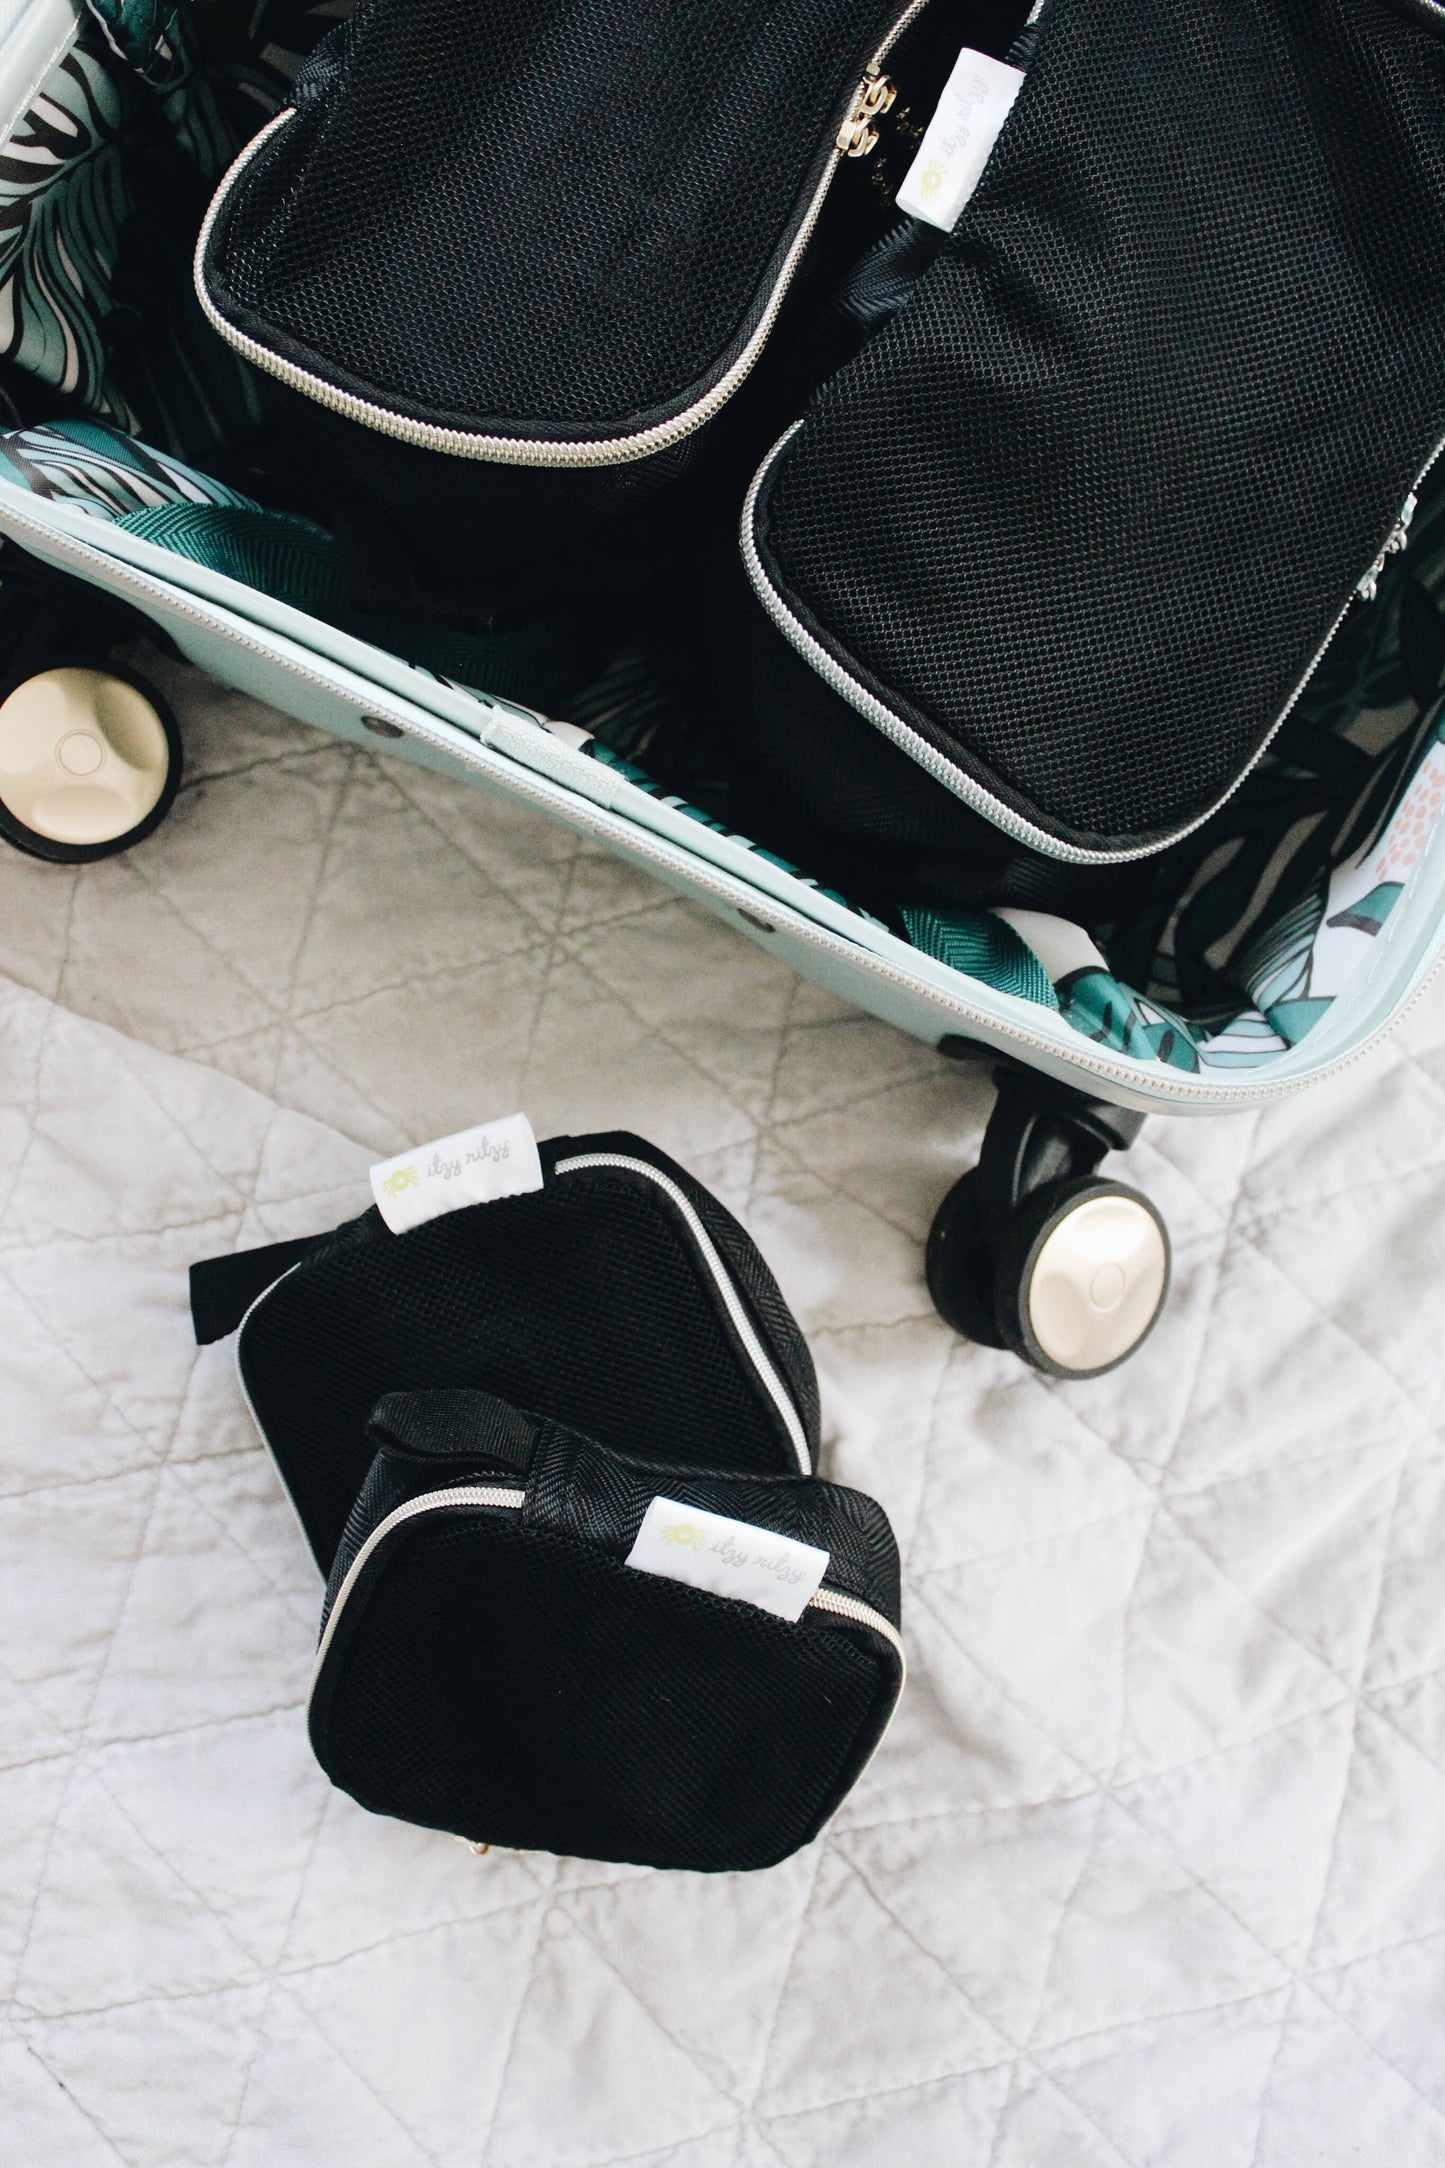 Black & Silver Pack Like a Boss™ Packing Cubes